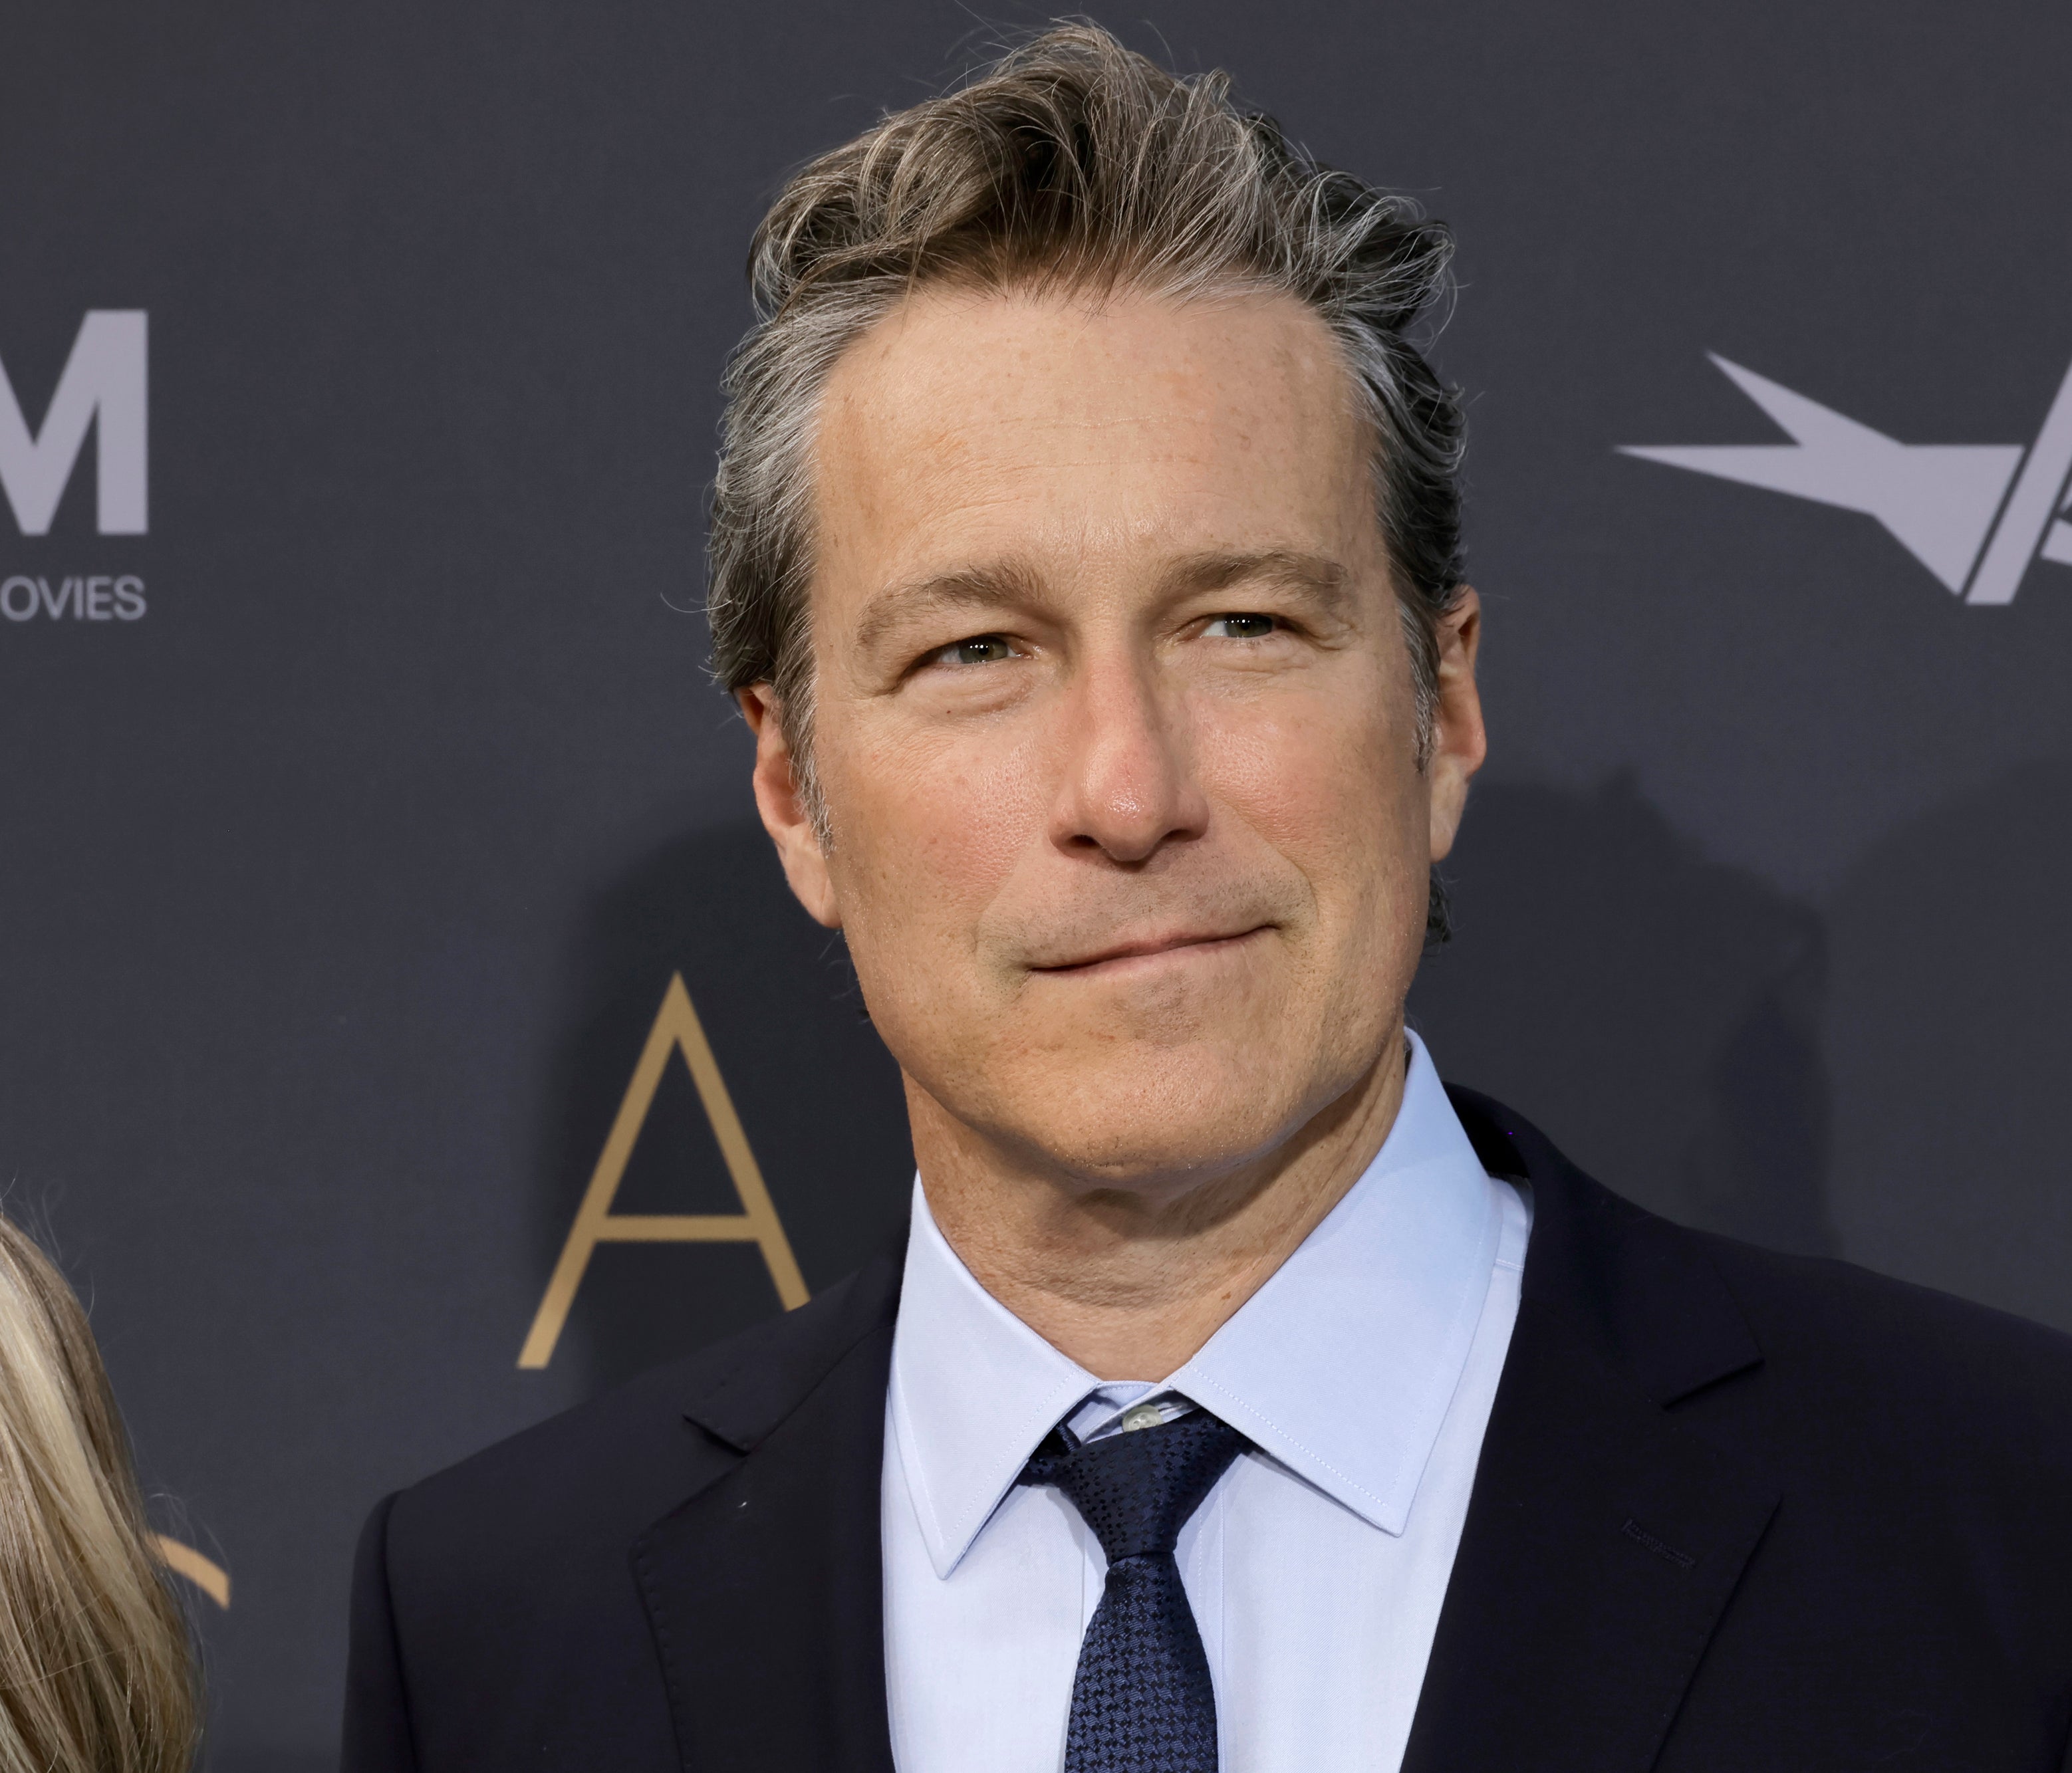 John Corbett, wearing a suit and tie, stands on a red carpet at an event